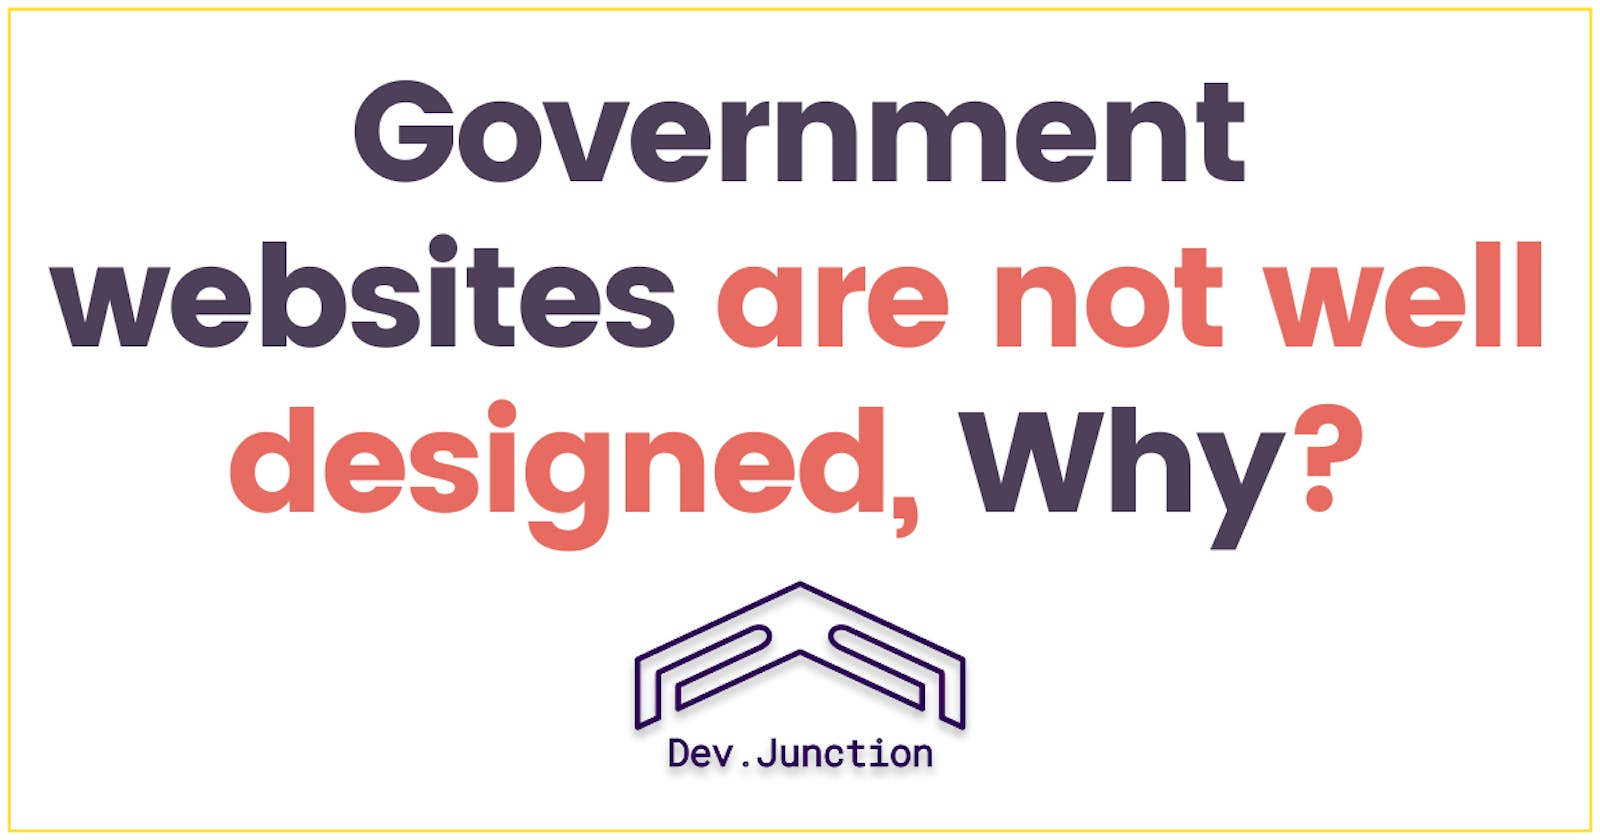 Why Indian government websites are not well designed?